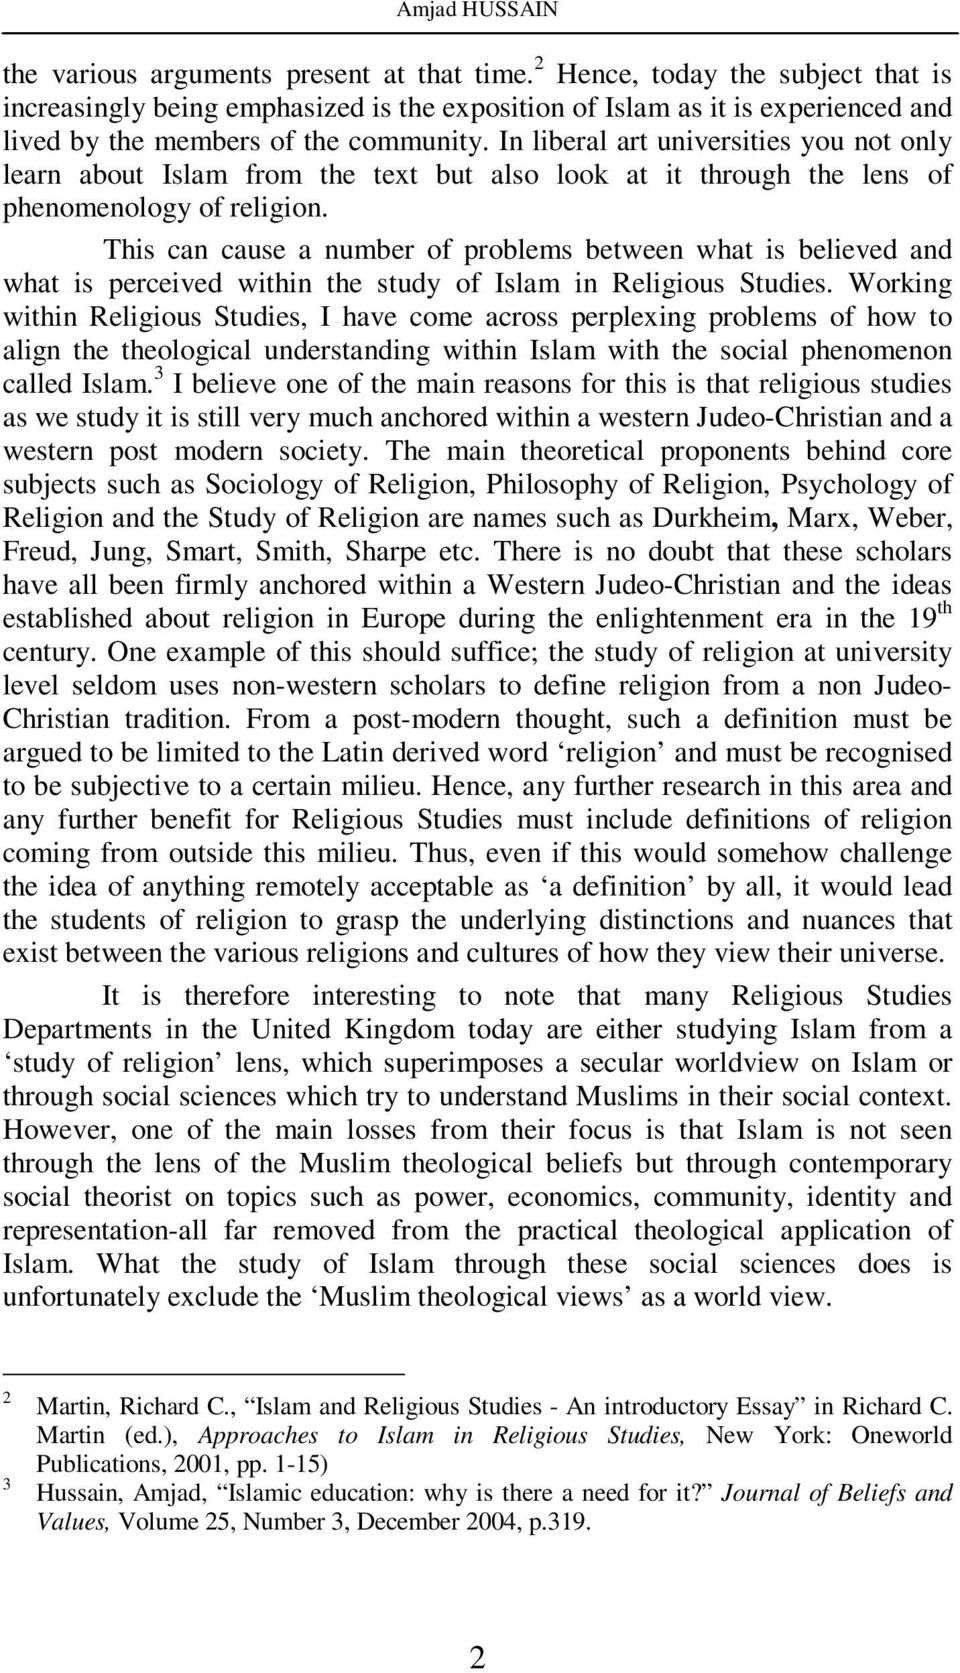 In liberal art universities you not only learn about Islam from the text but also look at it through the lens of phenomenology of religion.